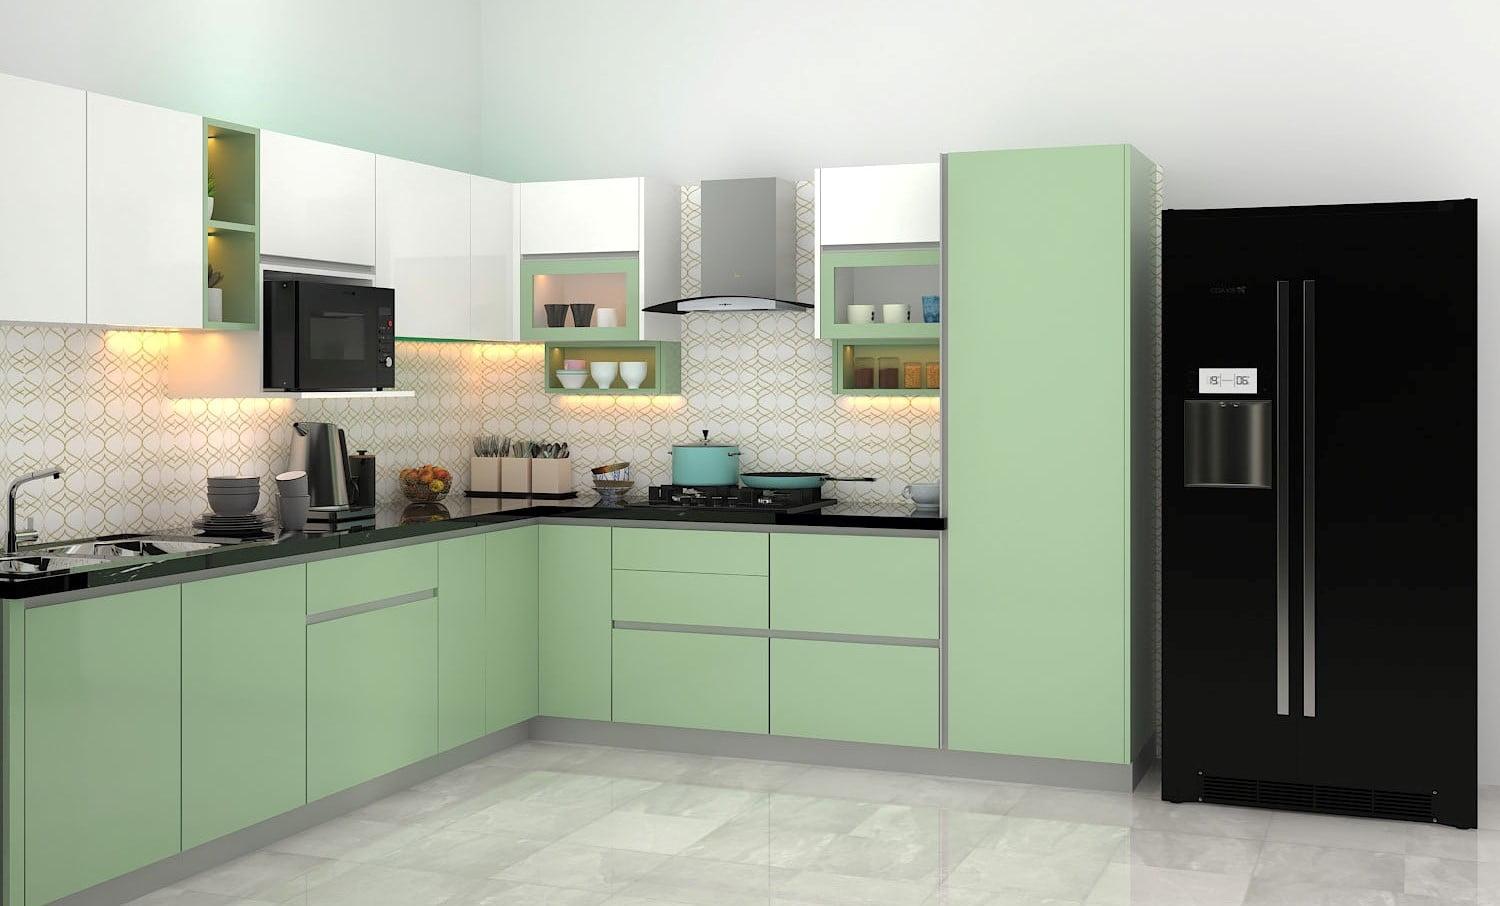 10 Benefits of Embracing the L-Shaped Modular Kitchen Design